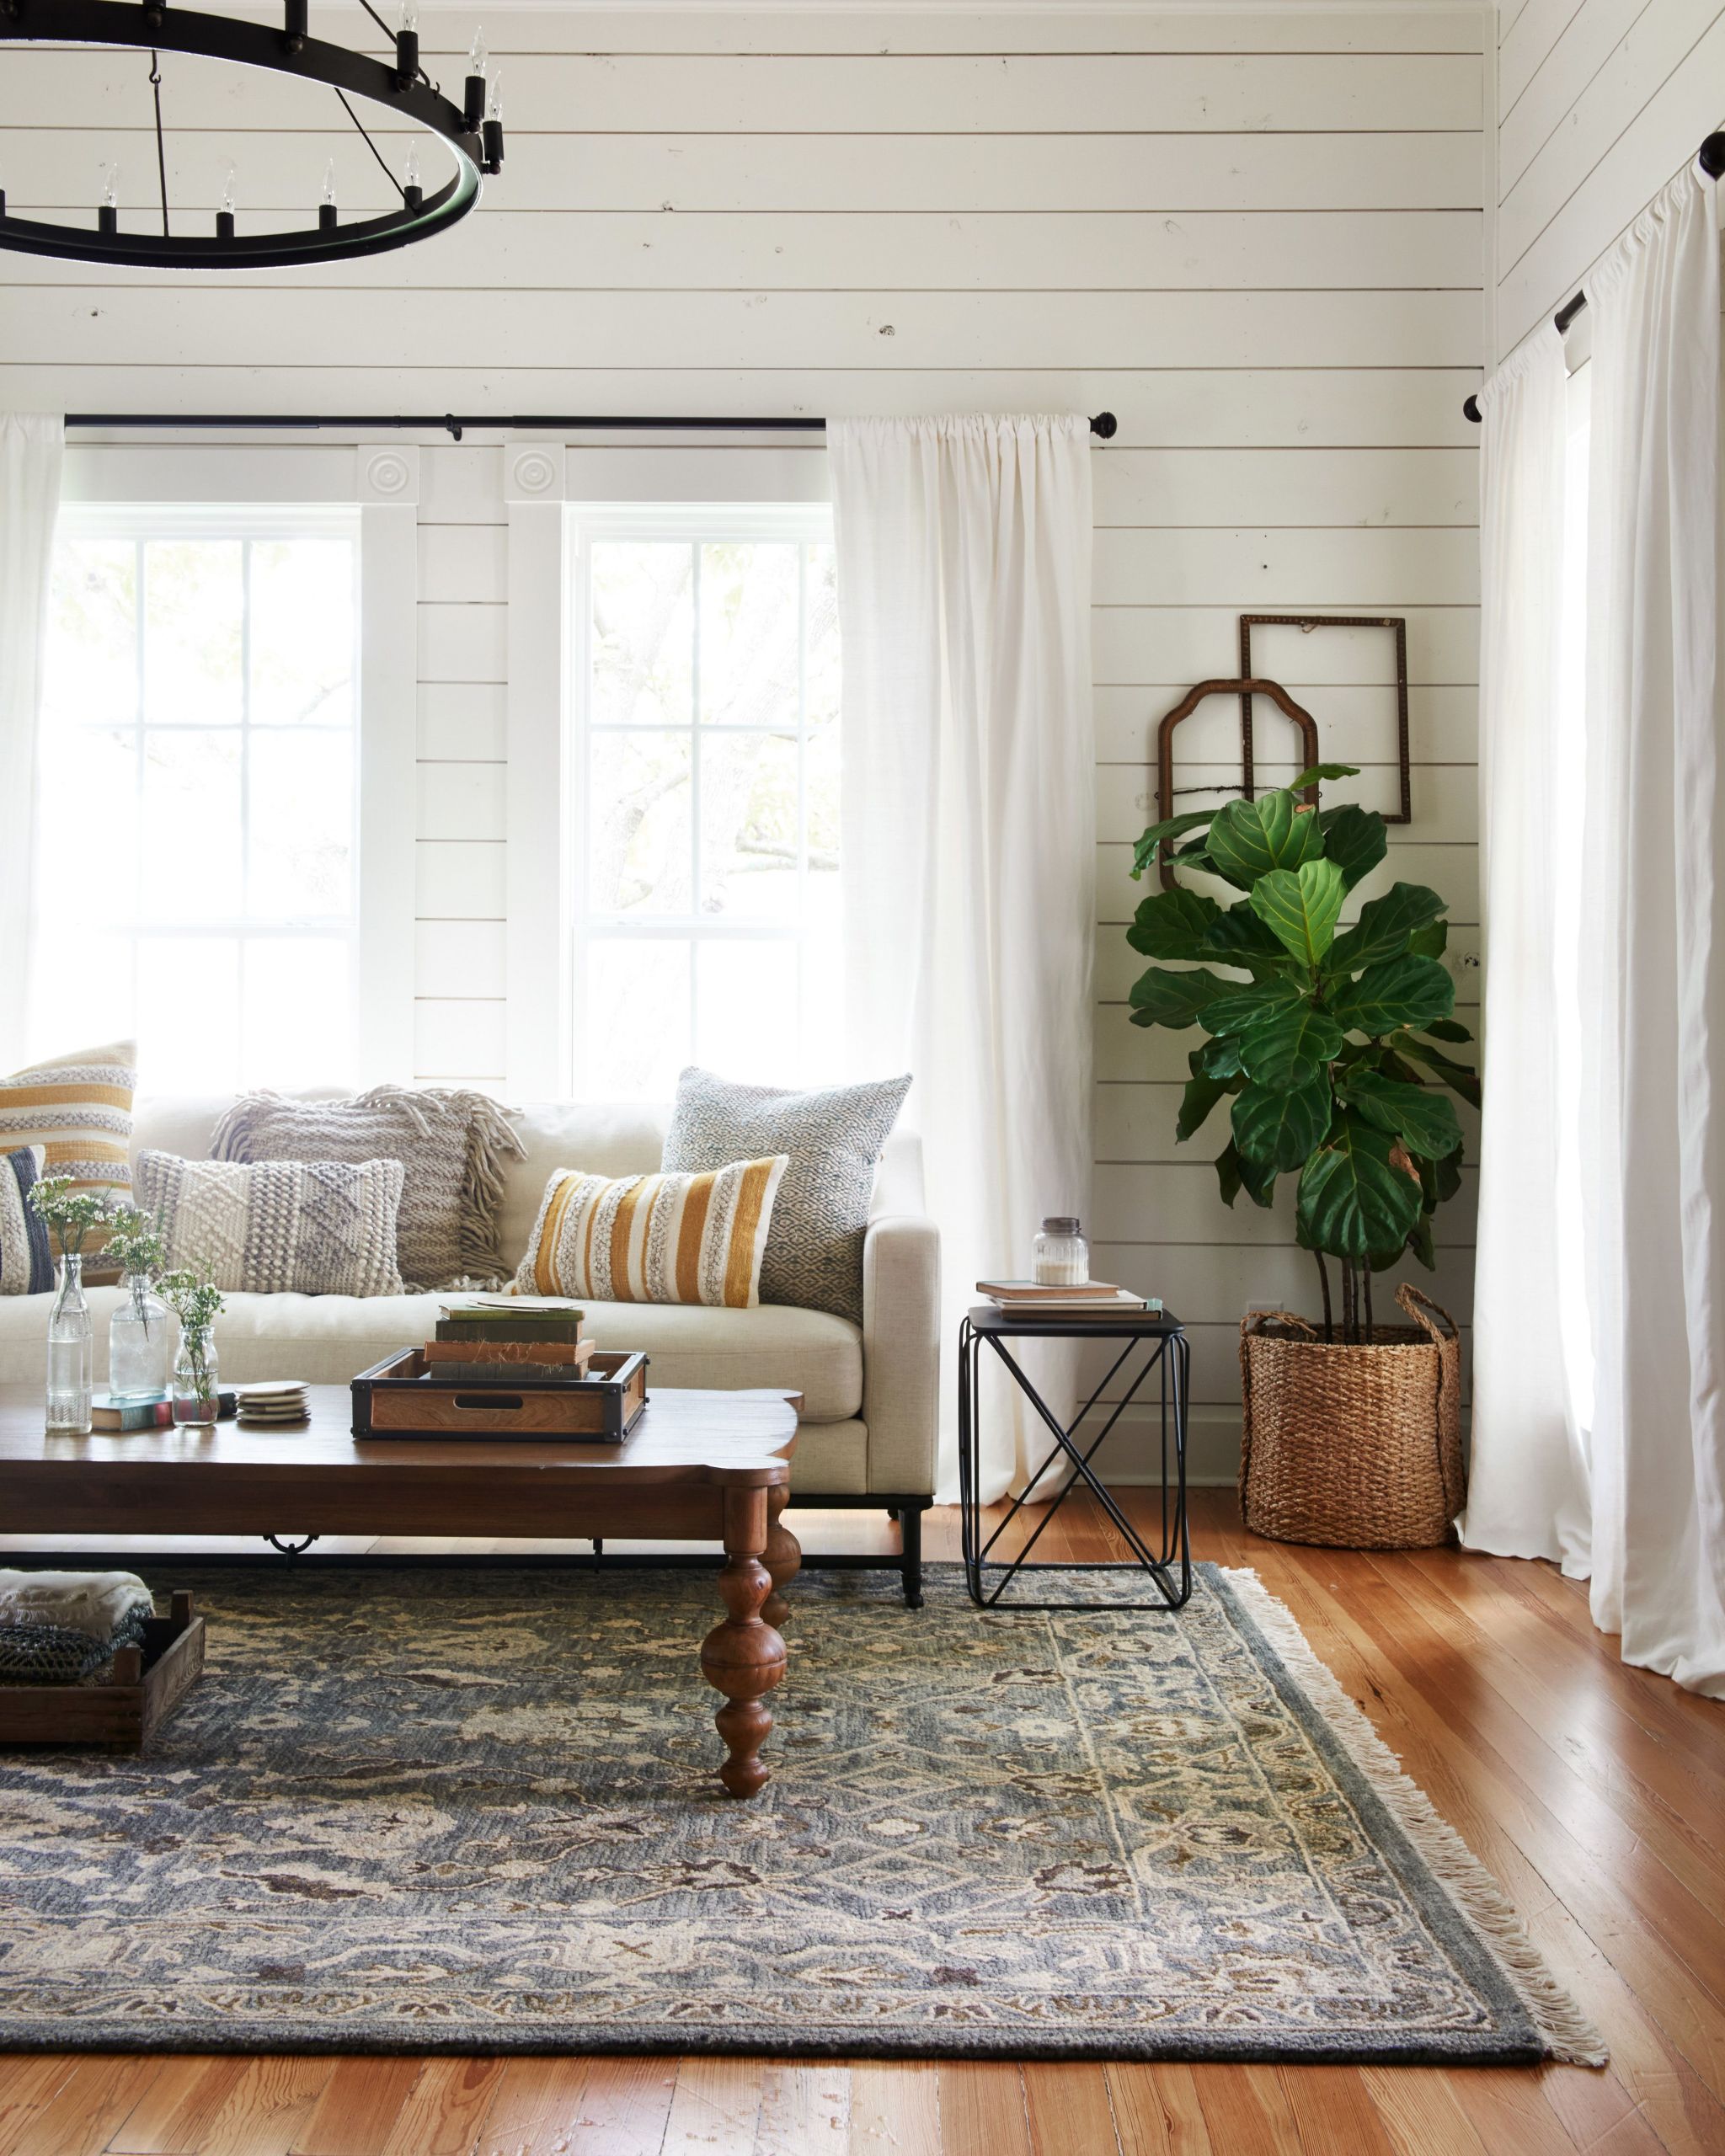 Joanna Gaines Living Room Ideas
 With subdued colors and traditional designs the Hanover